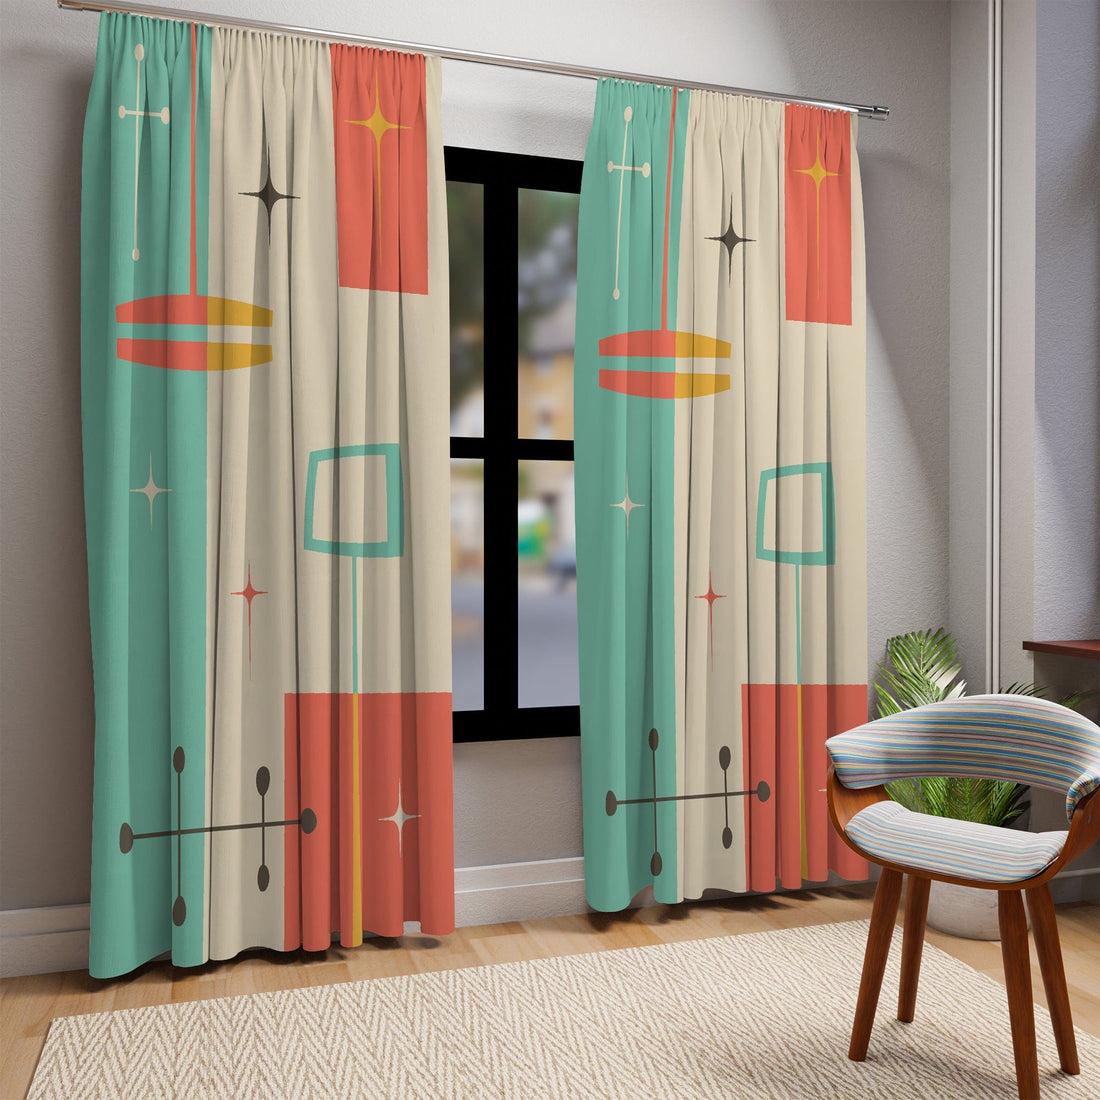 Kate McEnroe New York Double Panel Window Curtains in Mid Century Modern Geometric Abstract PrintWindow CurtainsCurtainBlackout - 50x84 - DoublePanel - 20220823181102249